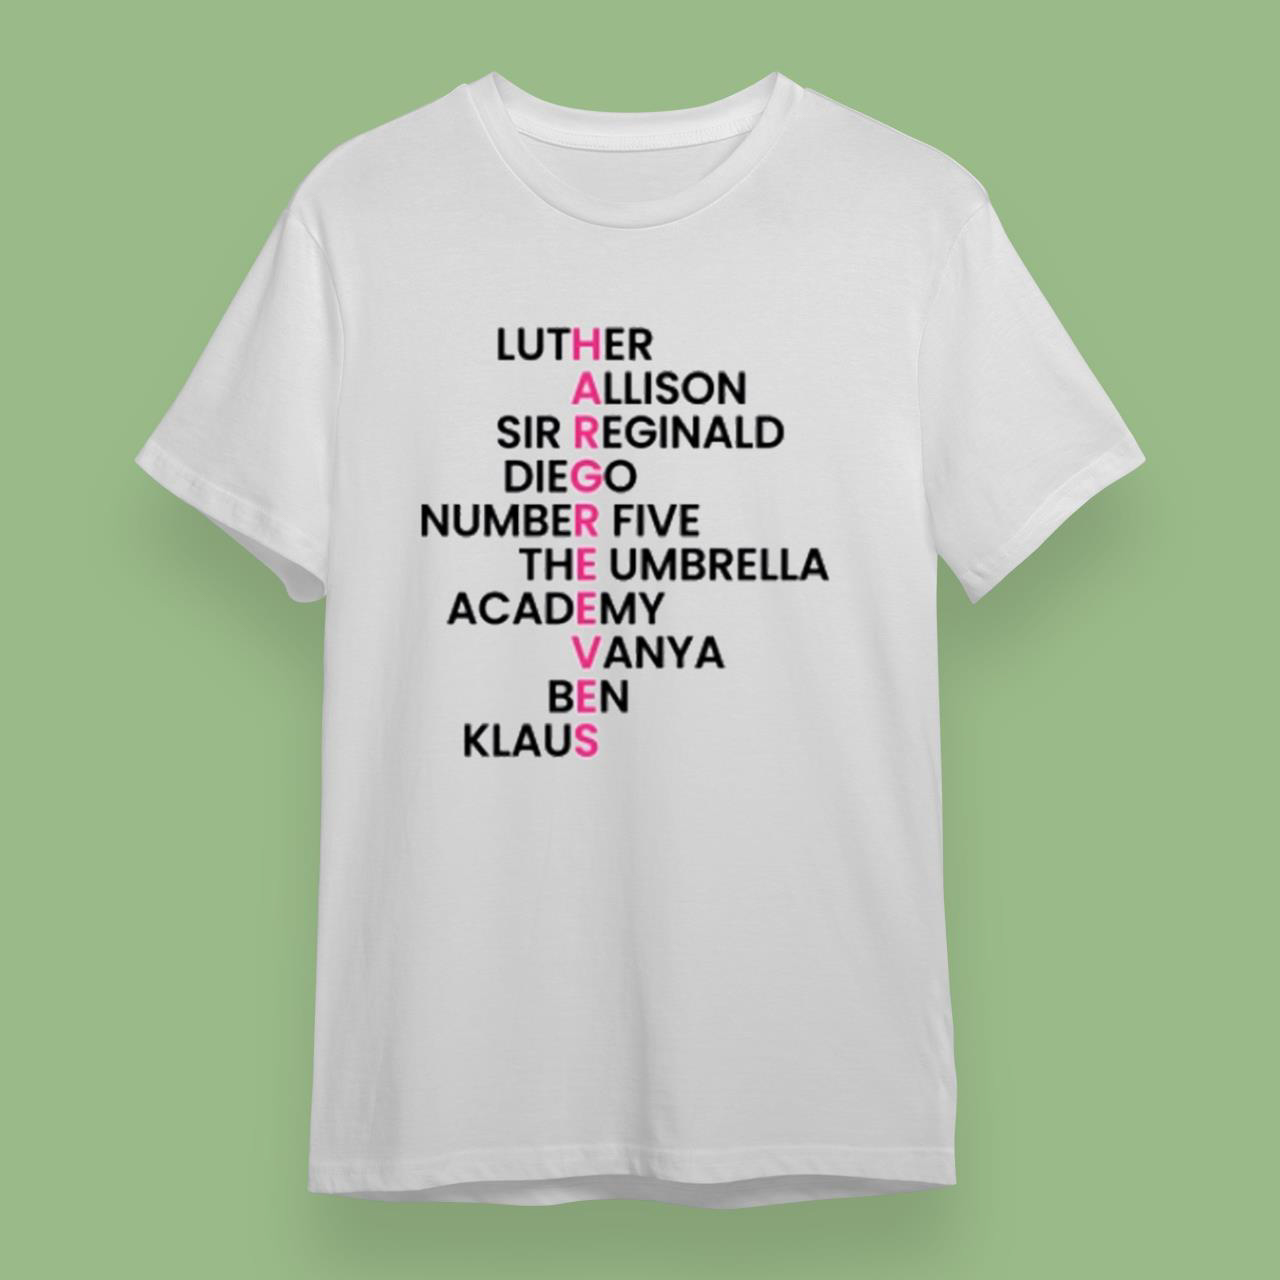 Hargreeves Family – The Umbrella Academy T-Shirt